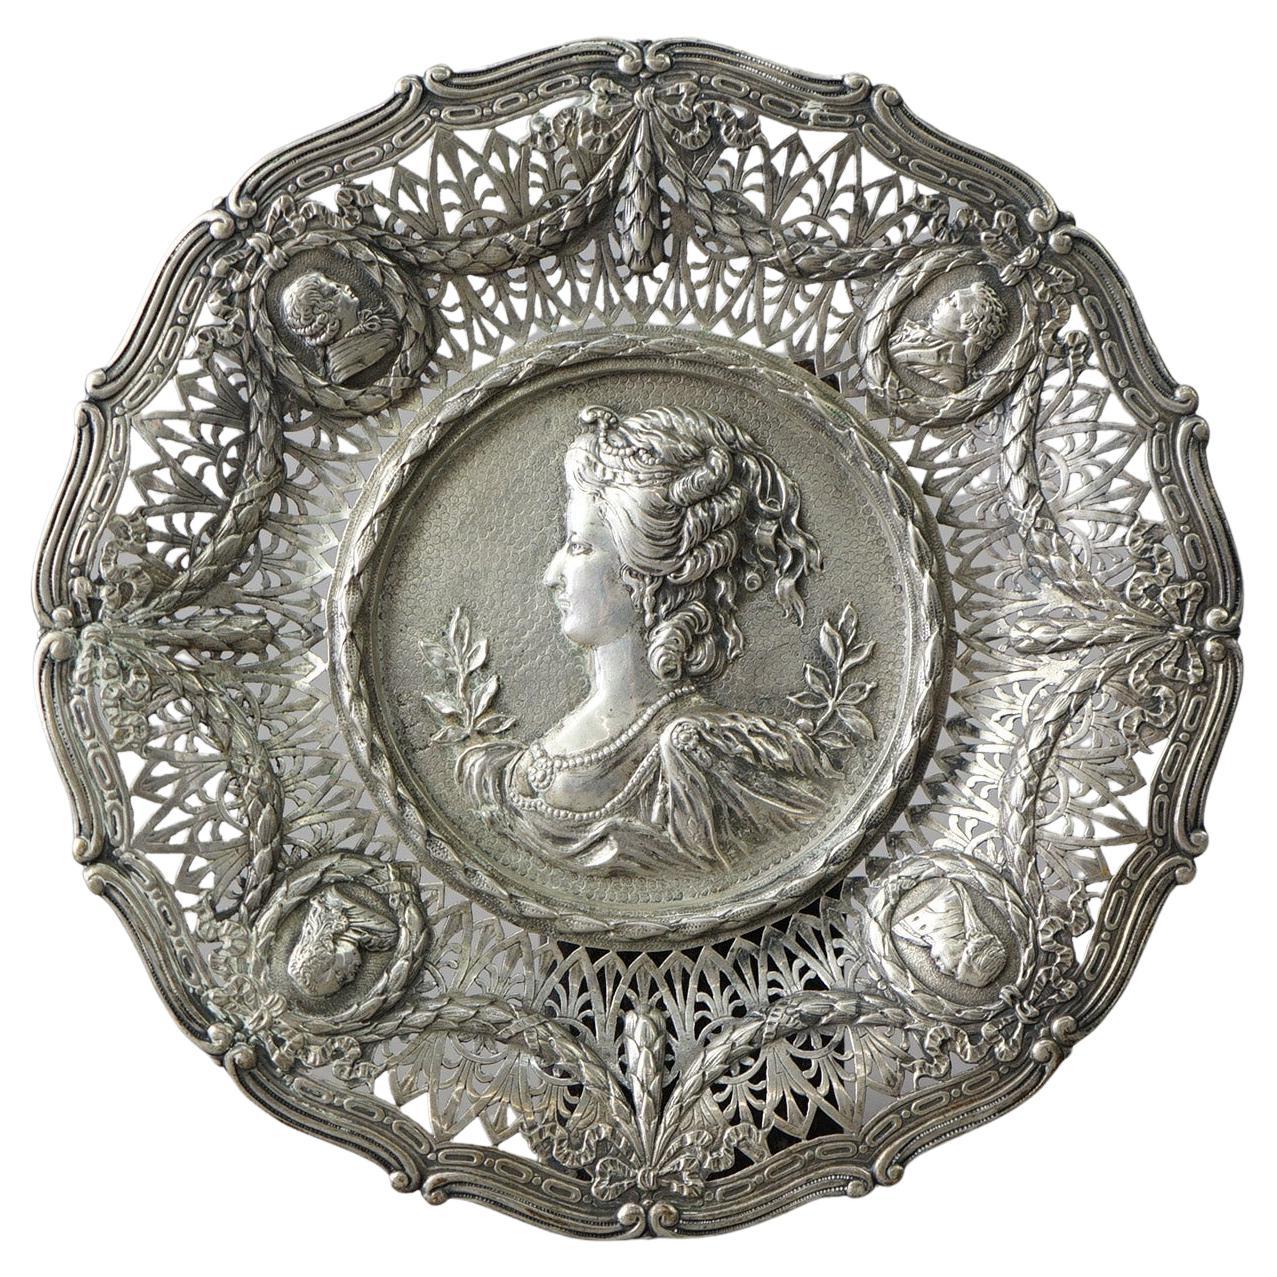 Antique Silver Reticulated & Embossed Portrait Tray with Hallmarks 19th C